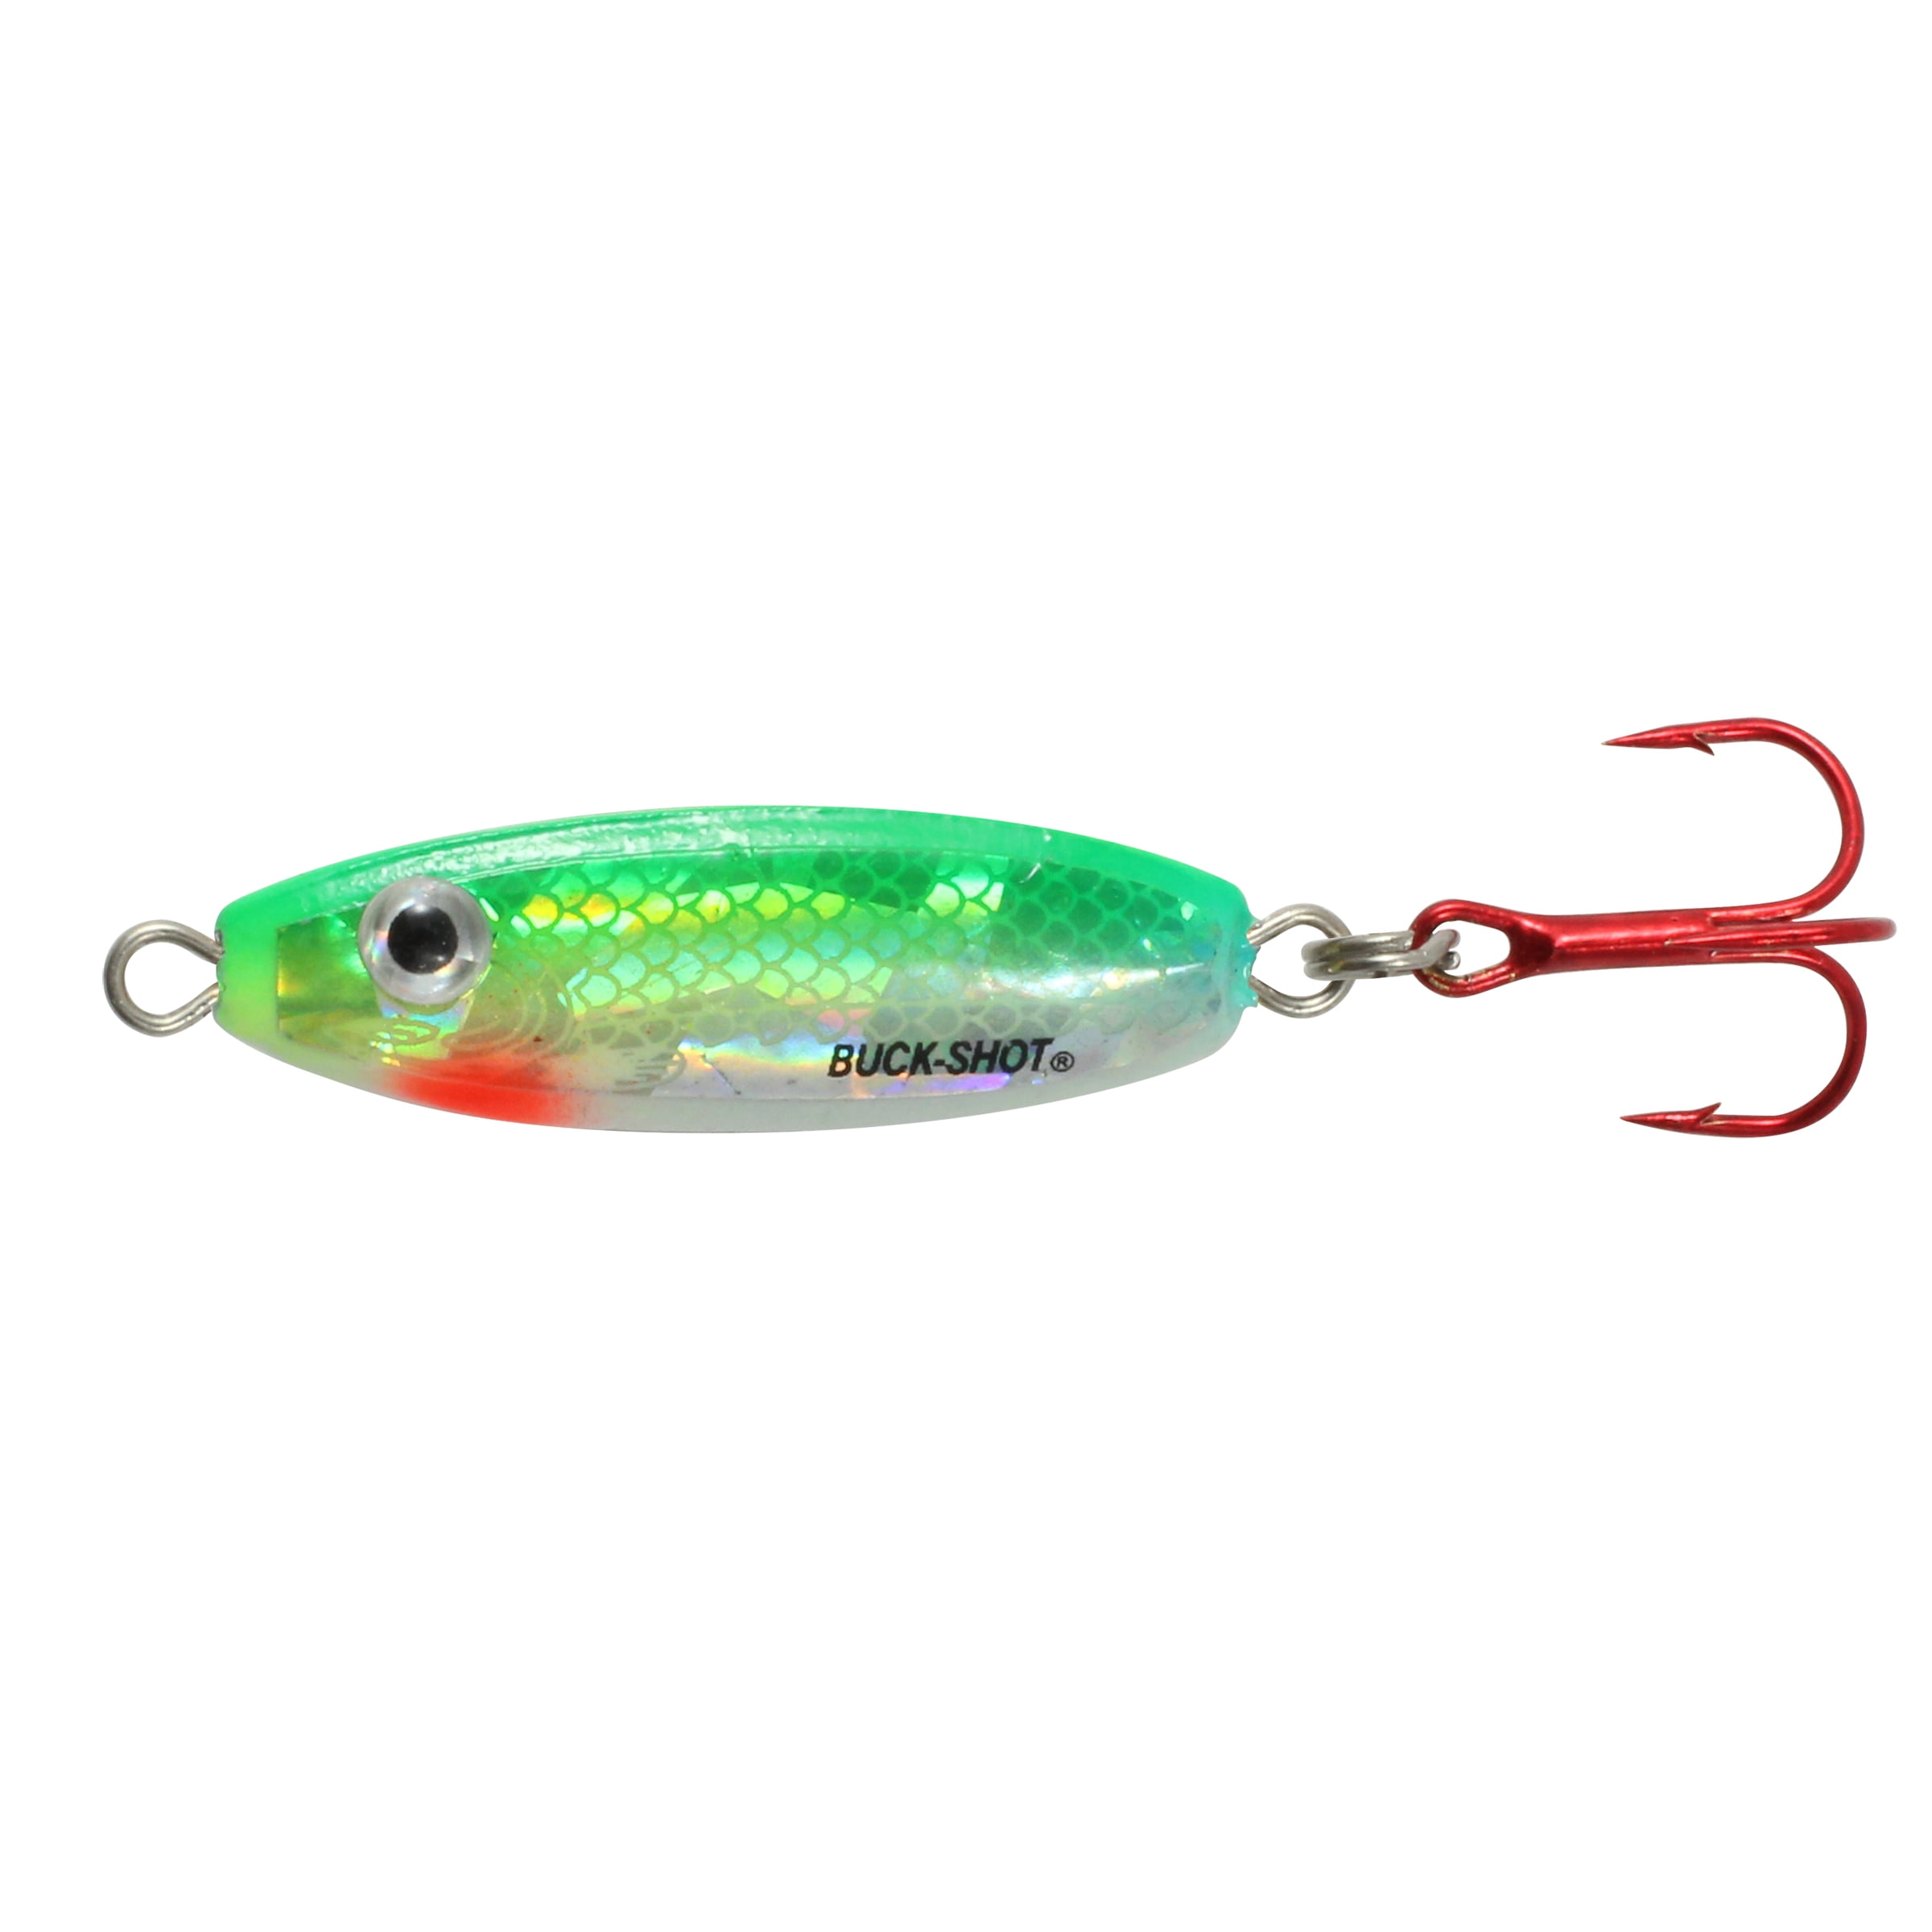 ☆BEST DEAL☆ 2 Pack 1/8oz Northland Forage Minnow Jig Super-Glo Perch ICE FISHING 